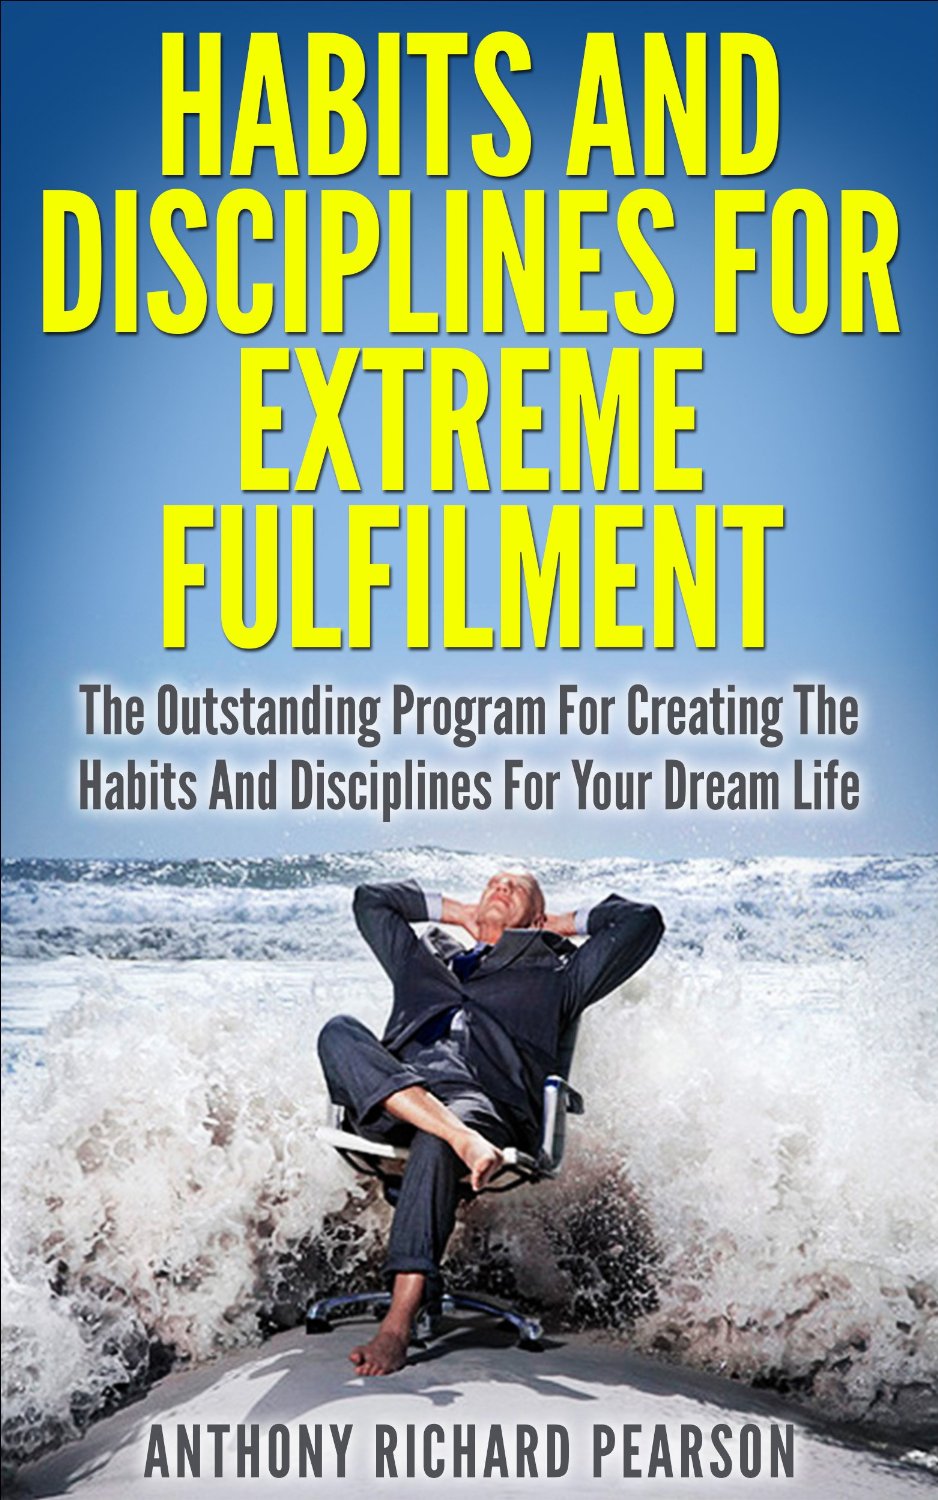 Success Habits And Disciplines For Extreme Fulfilment by Anthony Richard Pearson